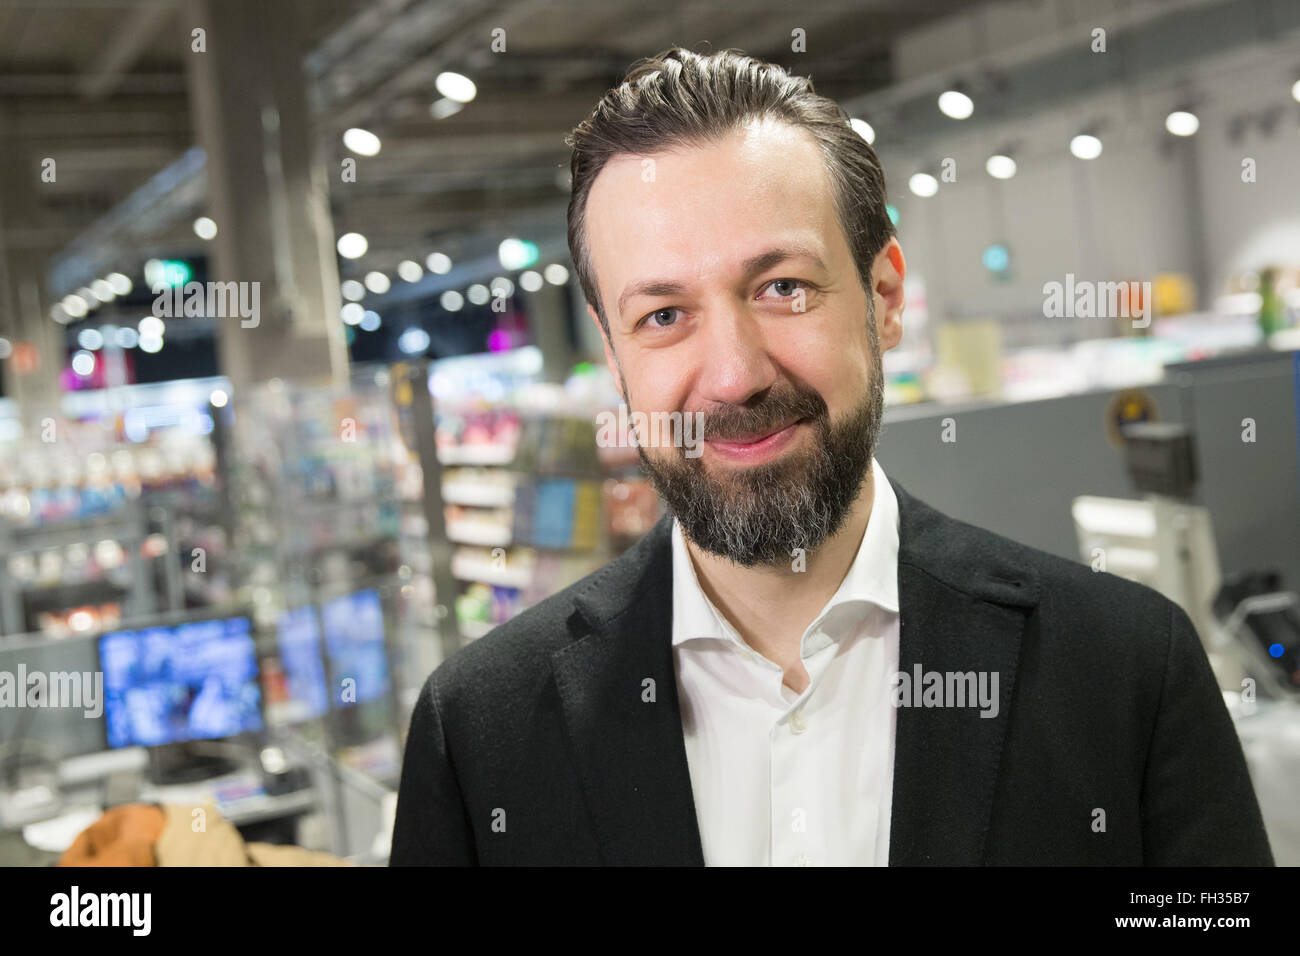 Hamburg, Germany. 23rd Feb, 2016. Christoph Woehlke, general manager of the Budnikowsky drug store chain poses during a press event at a Budnikowski branch in Hamburg, Germany, 23 February 2016. The Hamburg-based initiative 'Viva con Agua' intends to collect donations for sanitary facilities in Ethopia by selling the toilet paper. Initially, 100,000 packages of the product will be sold exclusively in the Budnikowski branches in Hamburg. Photo: CHRISTIAN CHARISIUS/dpa/Alamy Live News Stock Photo